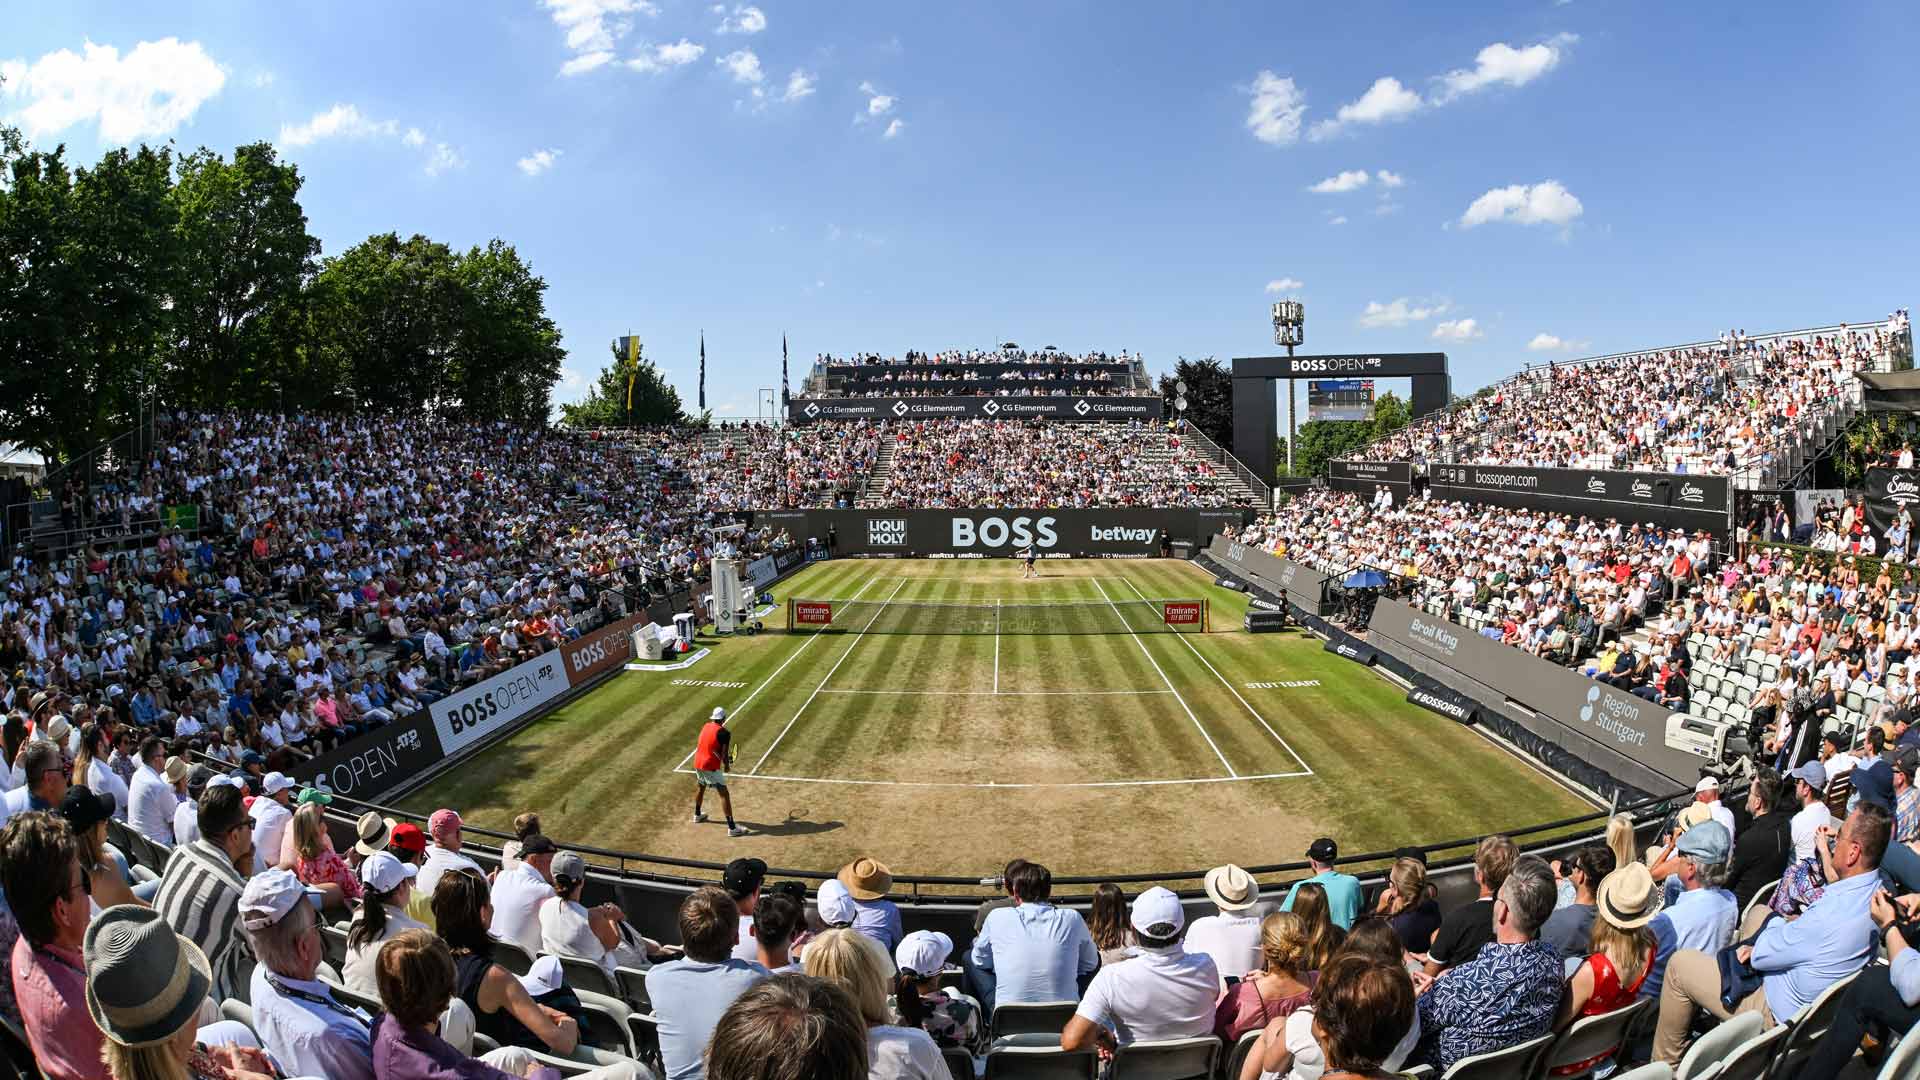 ATP Rankings Report – as of Jan. 30, 2023 – Open Court